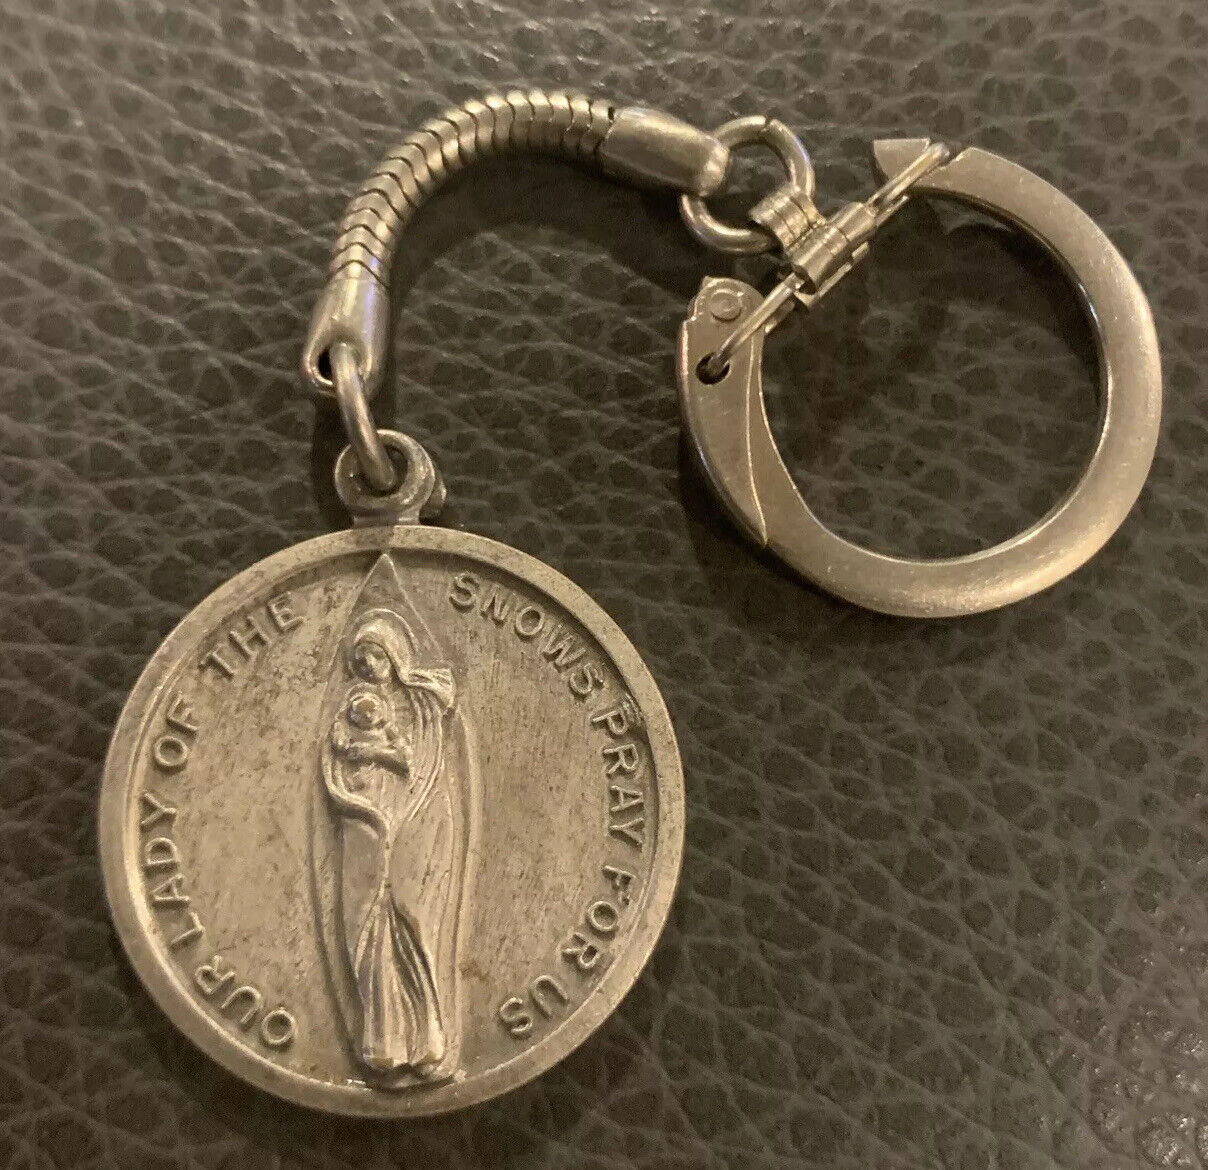 Shrine of Our Lady of the Snows Belleville Coin Vintage Keychain Keyring